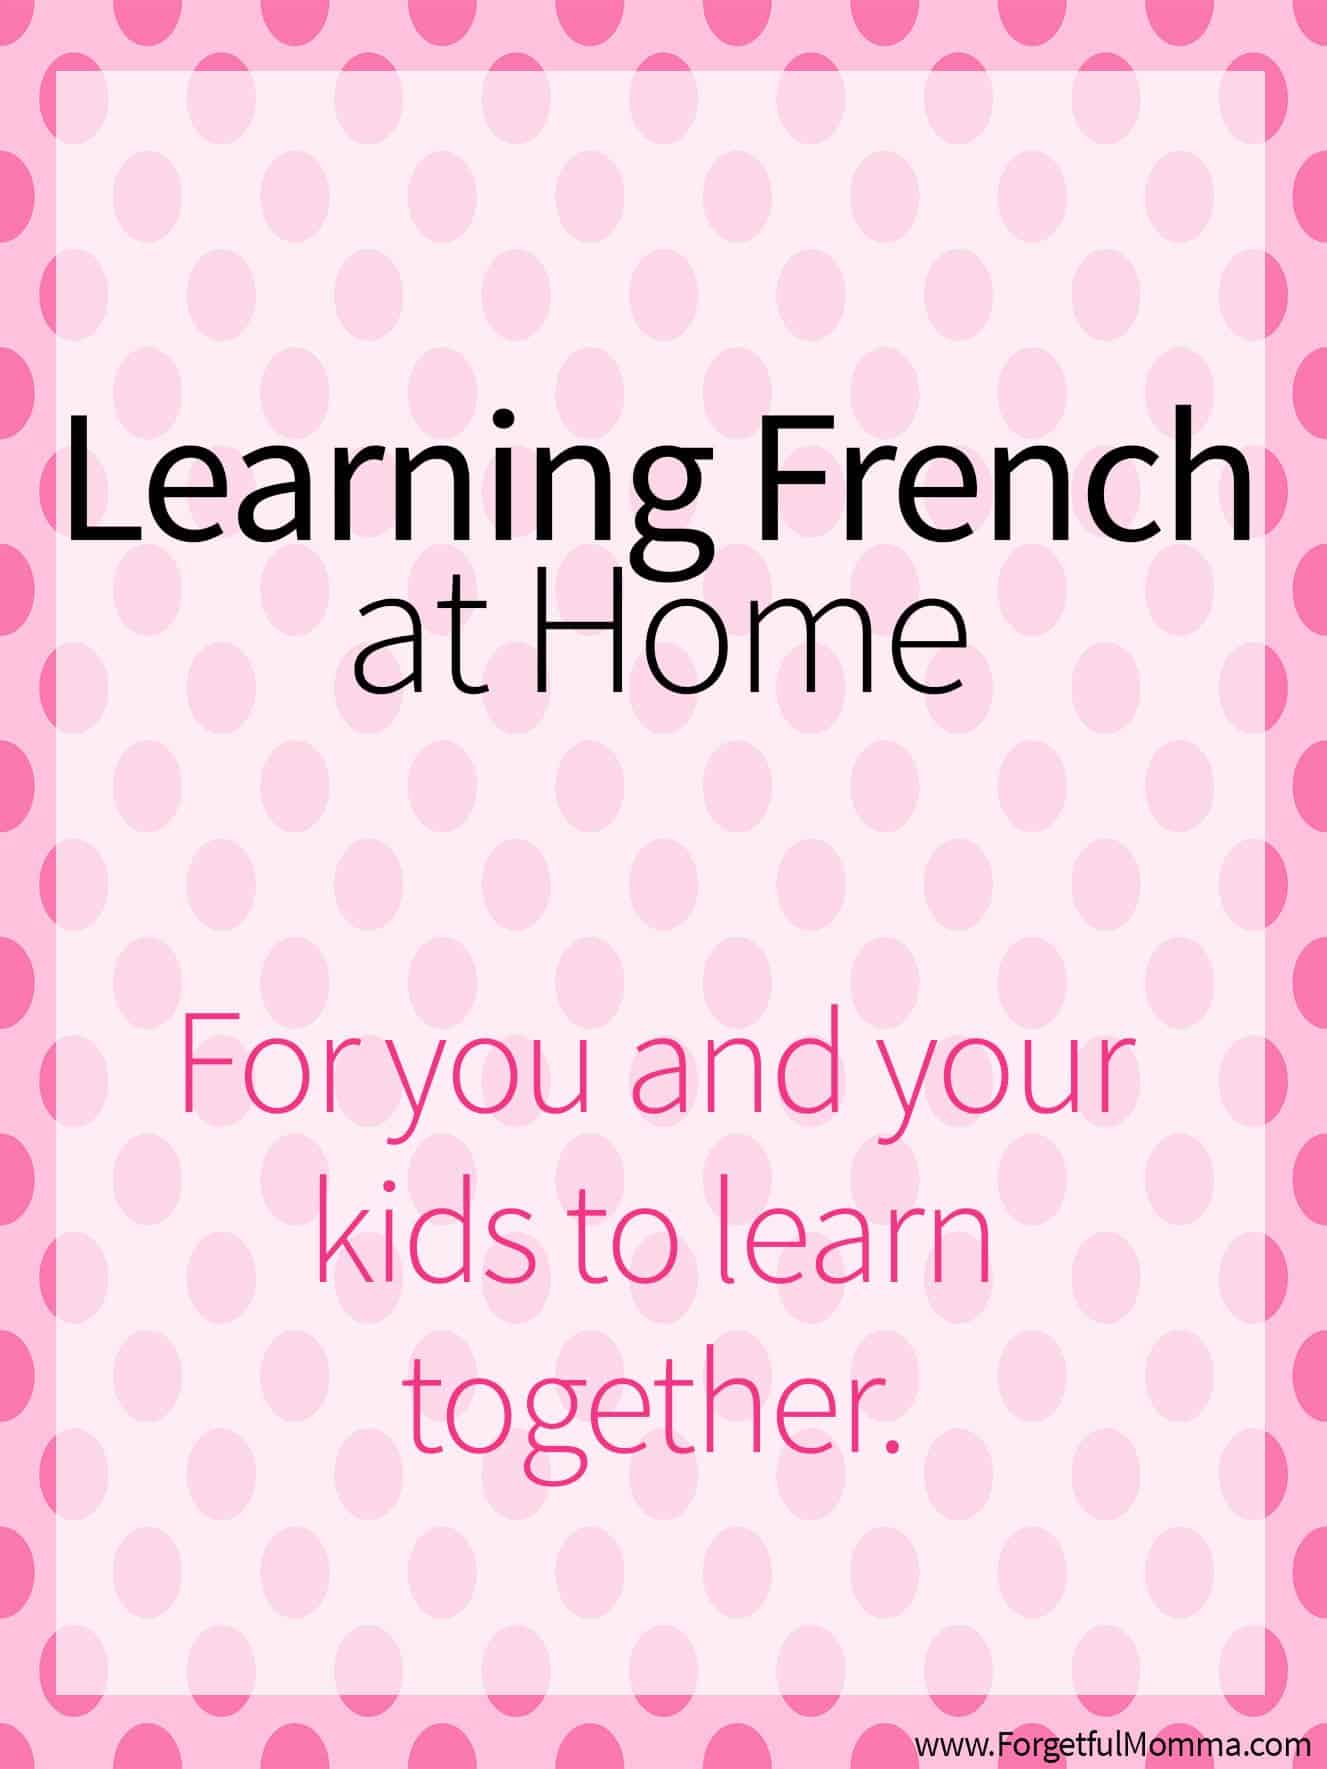 Learning French at Home